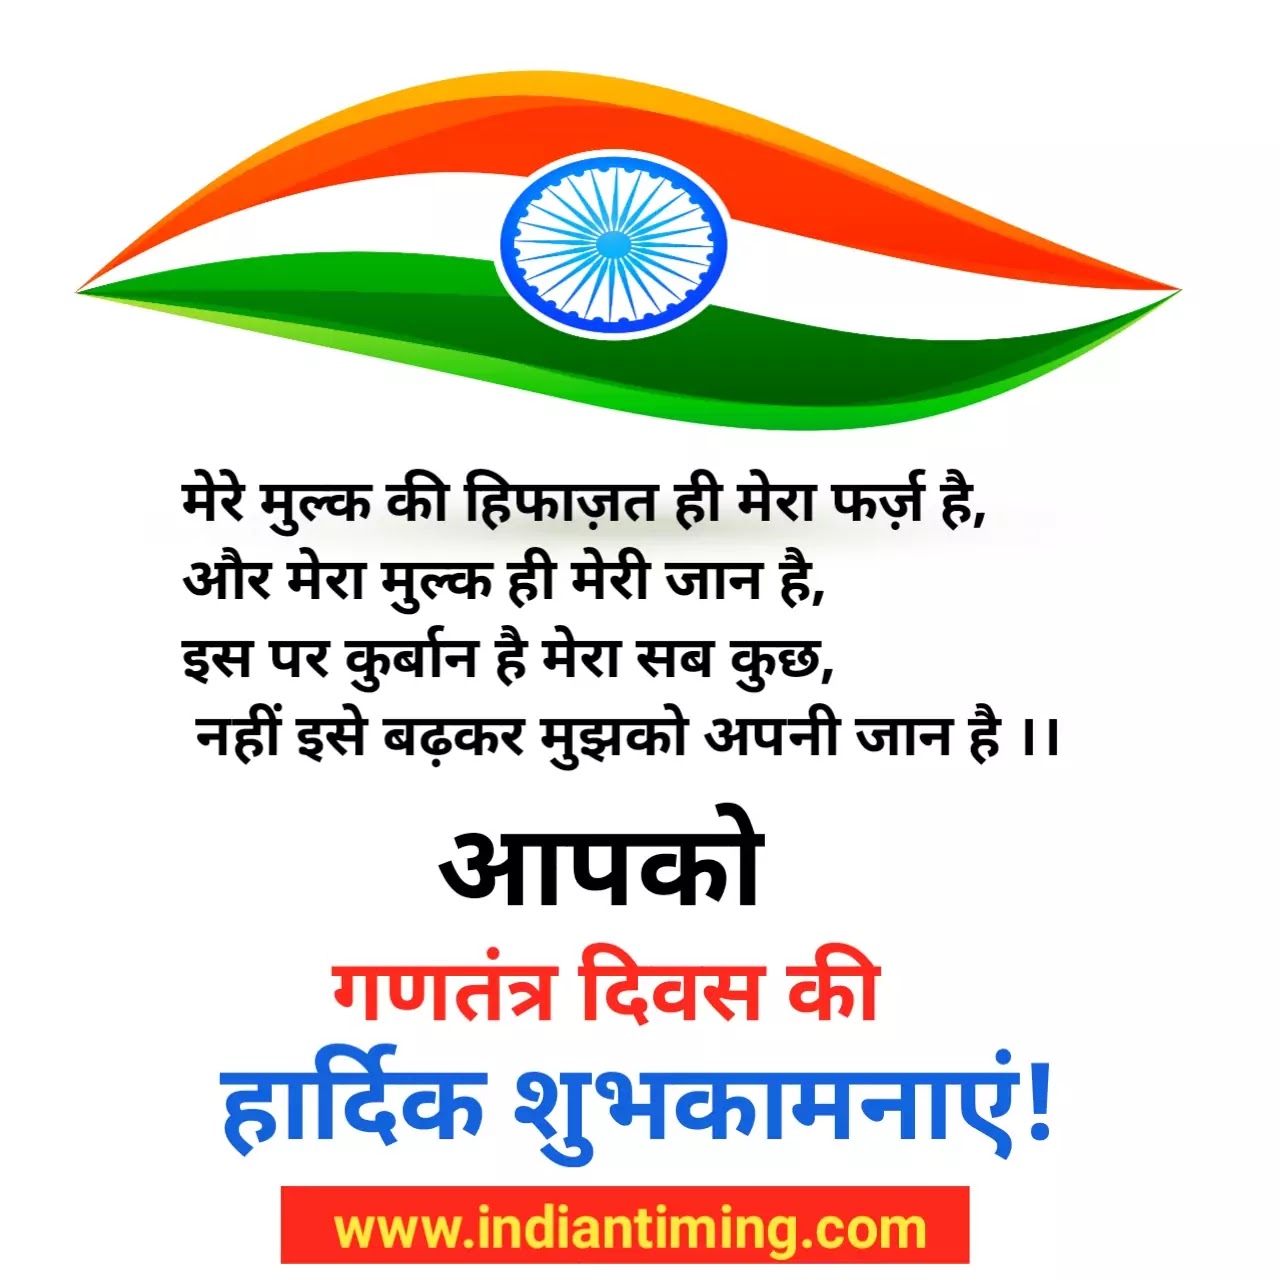 Republic Day Images Hd 2021: Republic Day Quotes In Hindi